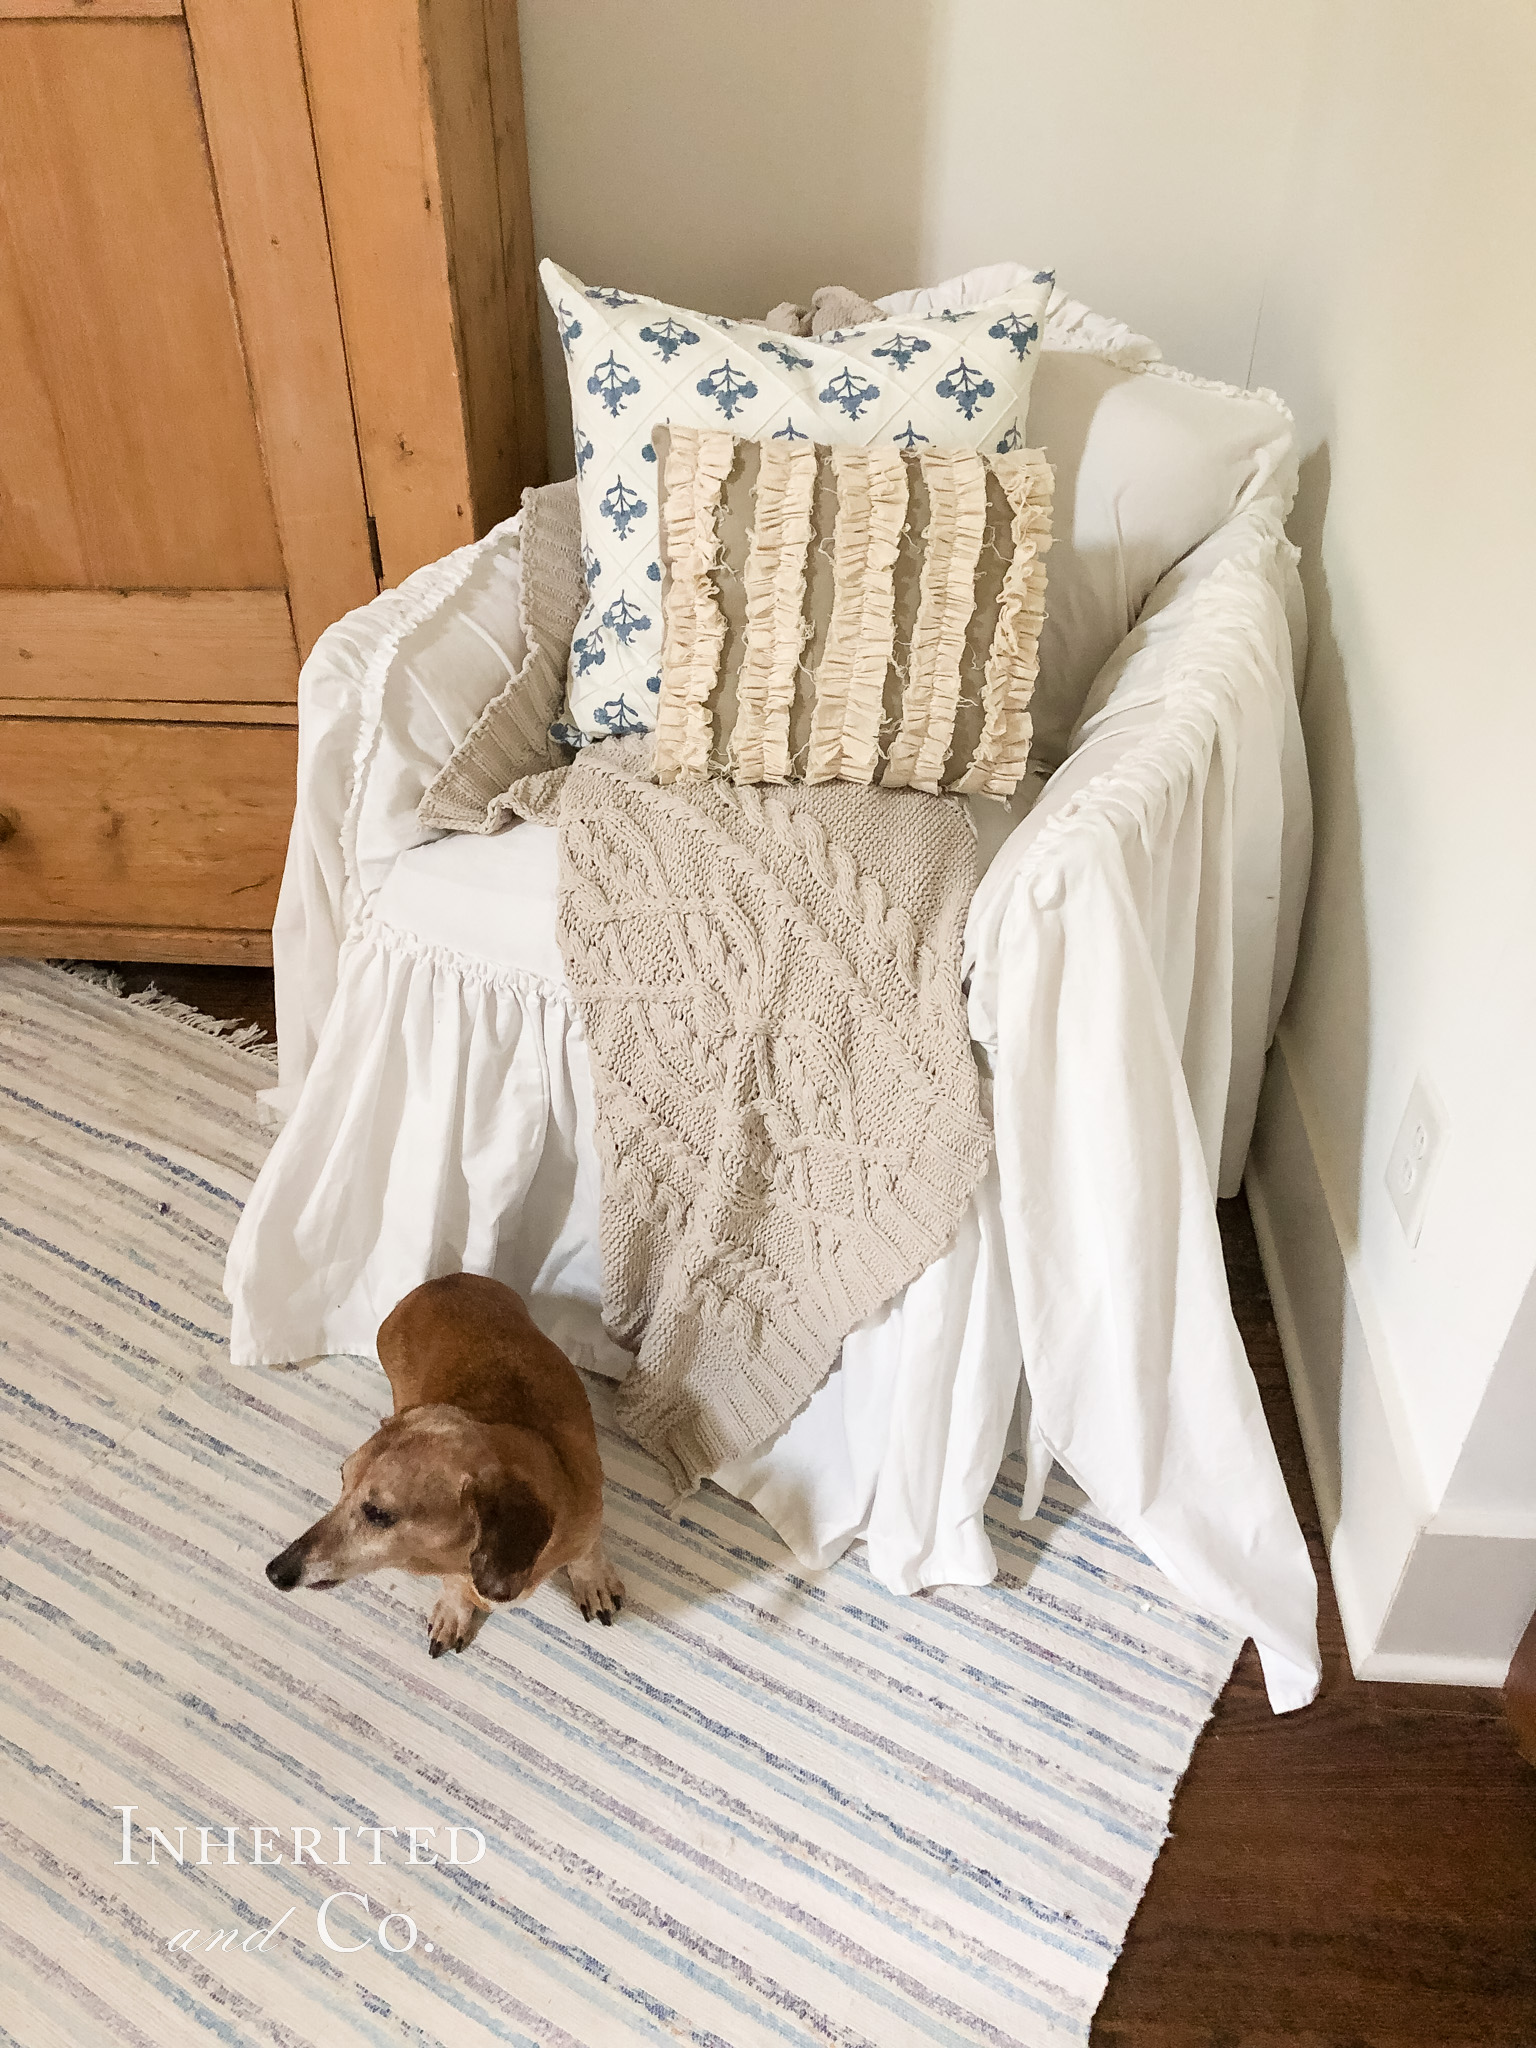 White Slipcovered Chair with dachshund in front of it